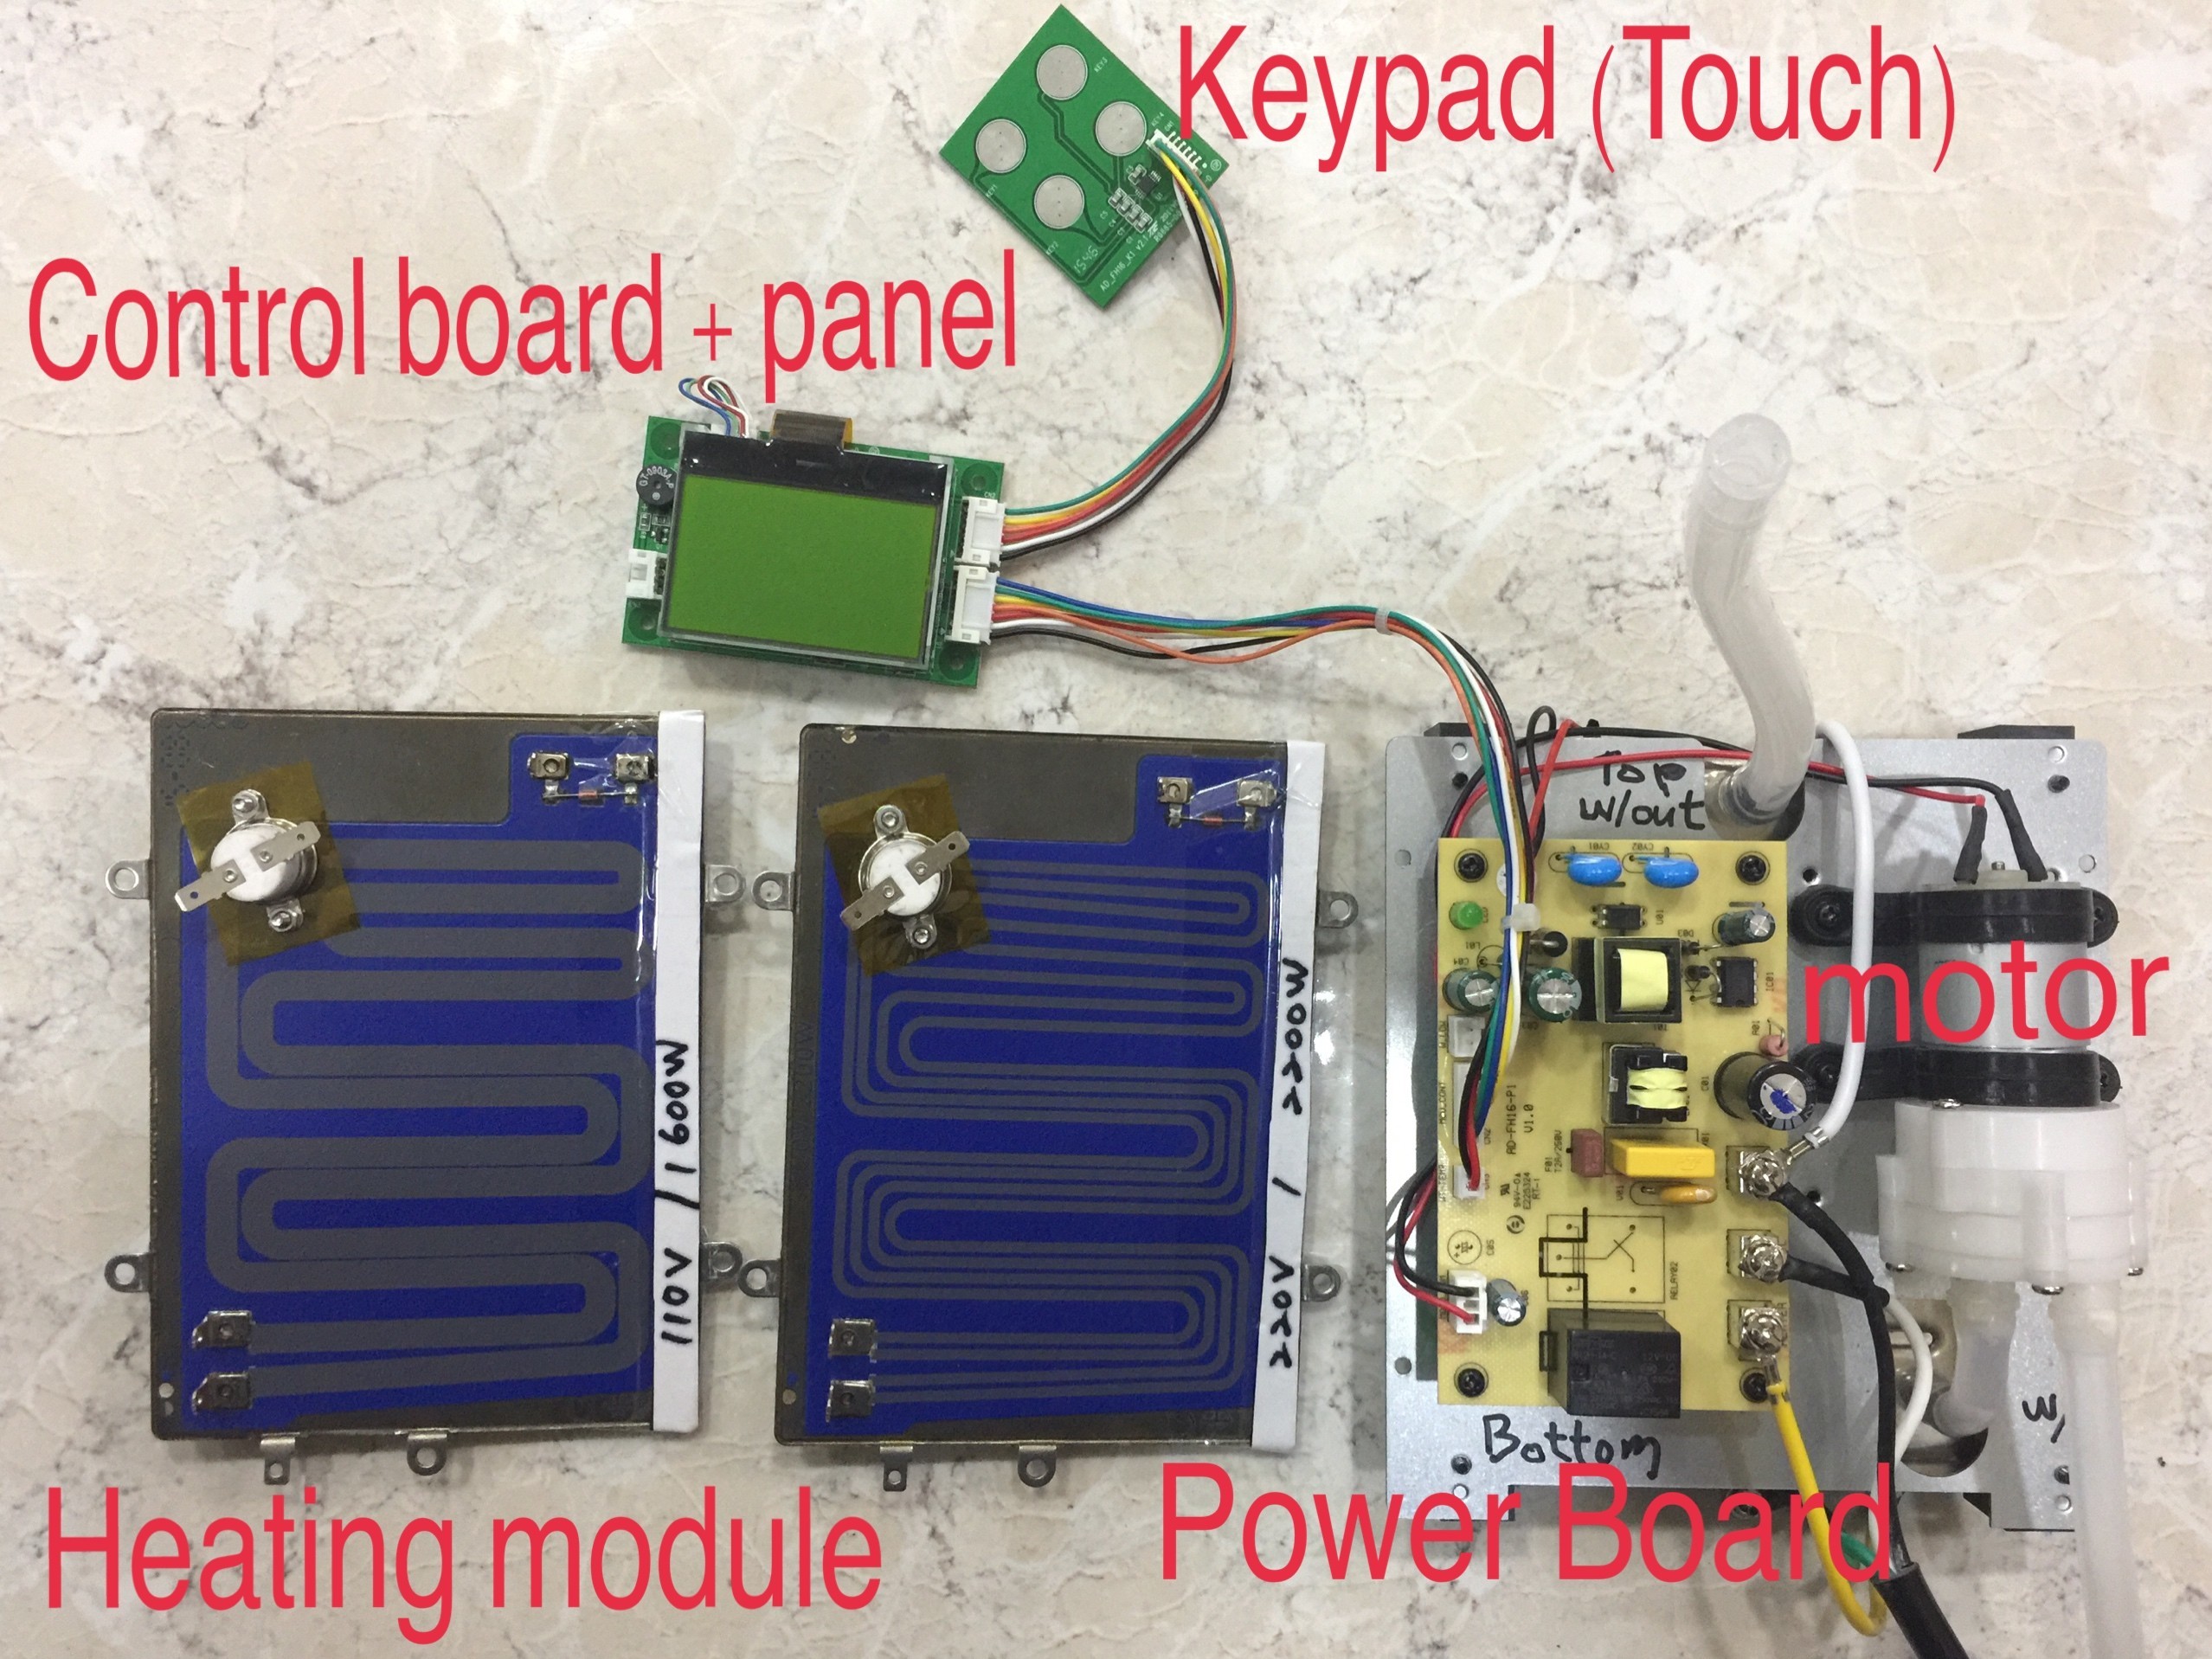 Thick film heating module / control panel / power board / motor / touchpad(kit)